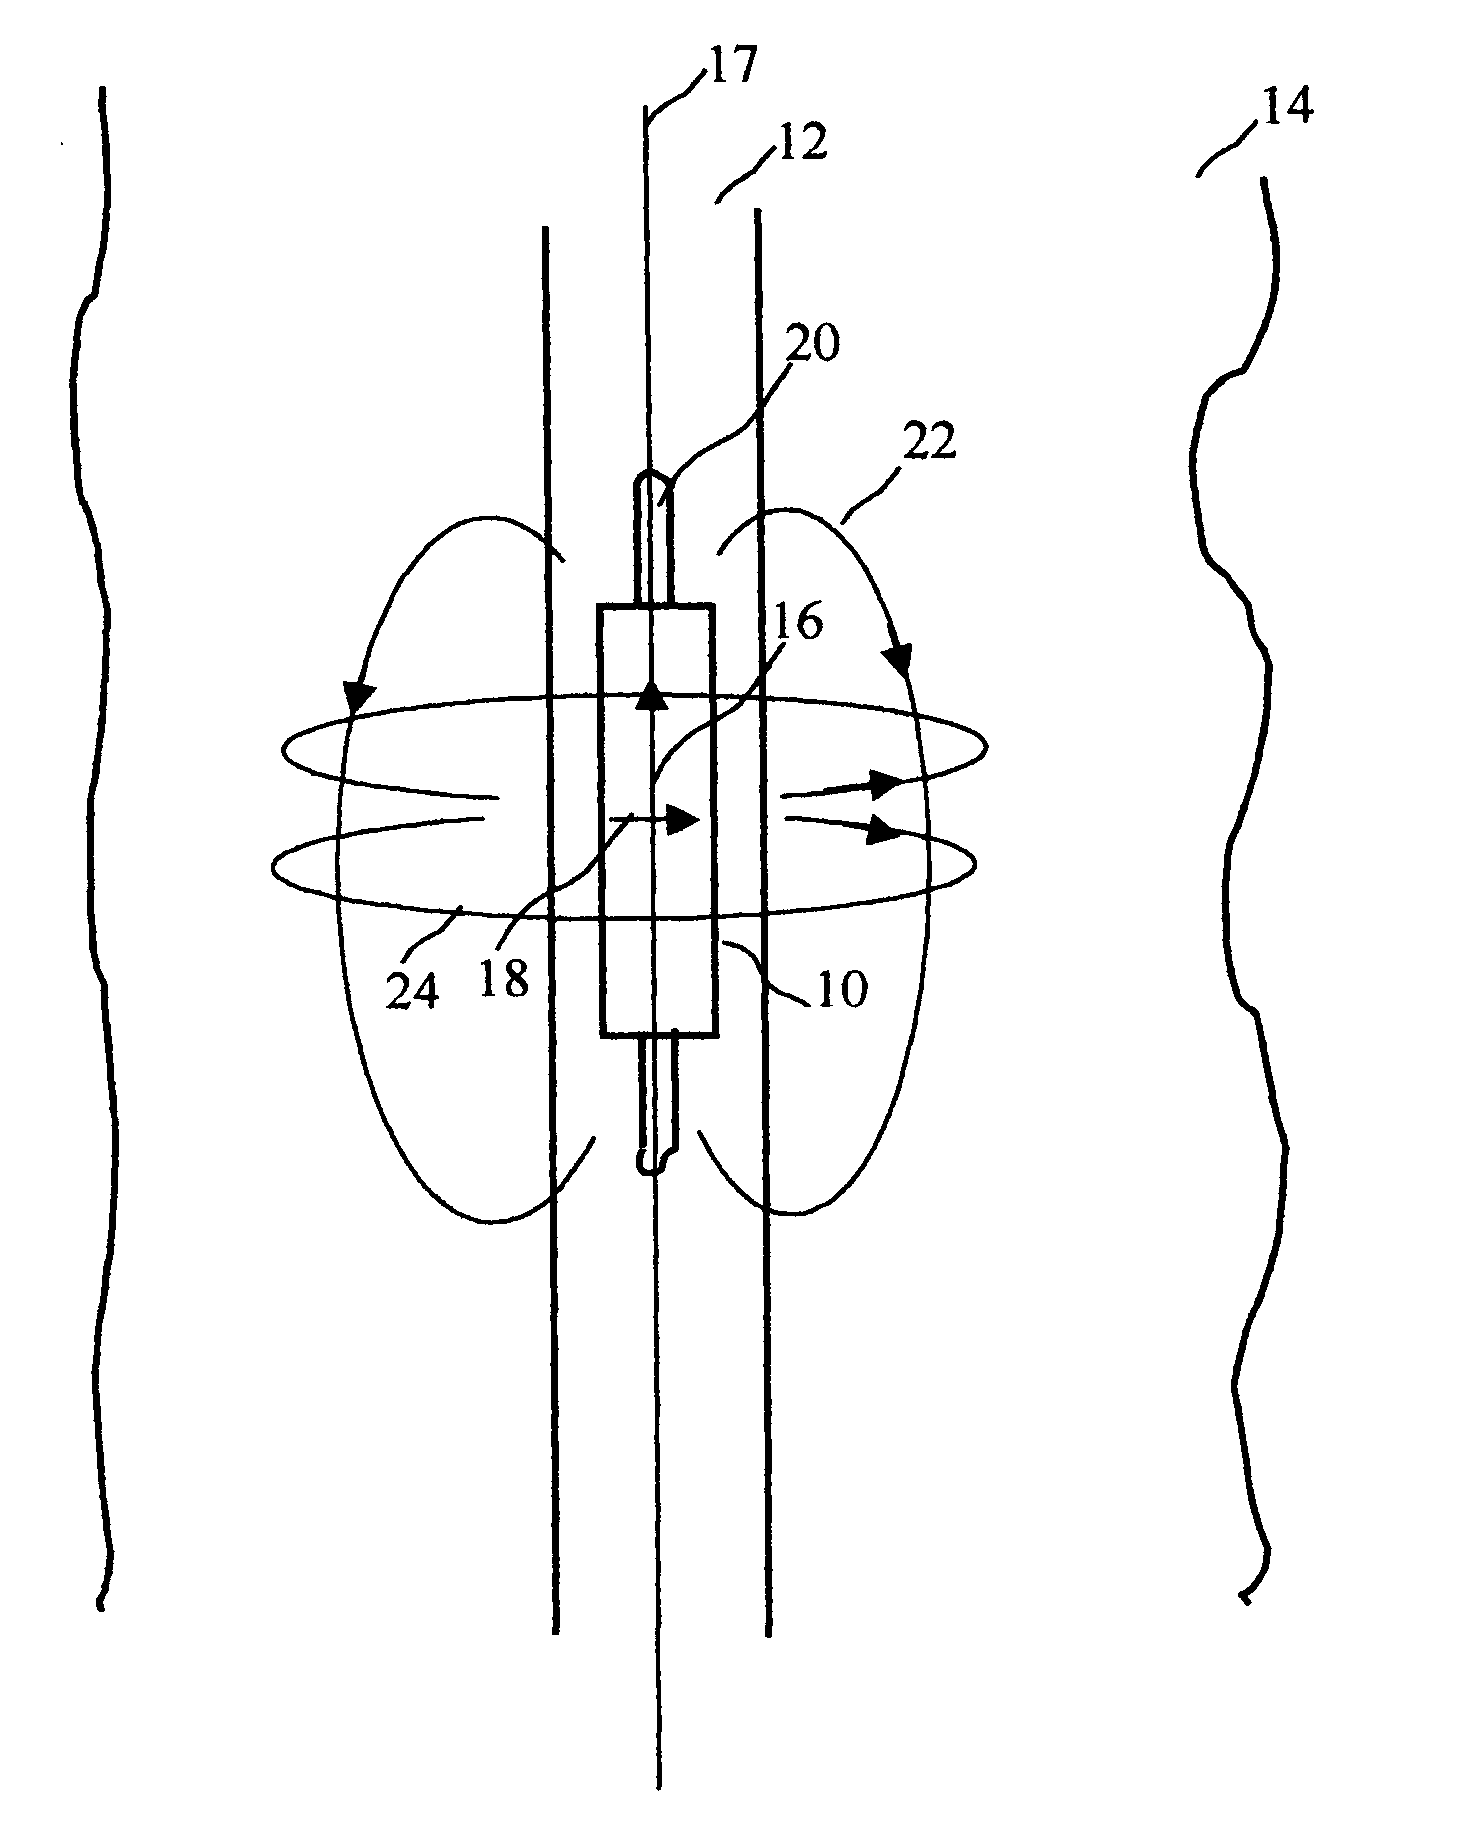 Method and apparatus of using magnetic material with residual magnetization in transient electromagnetic measurement